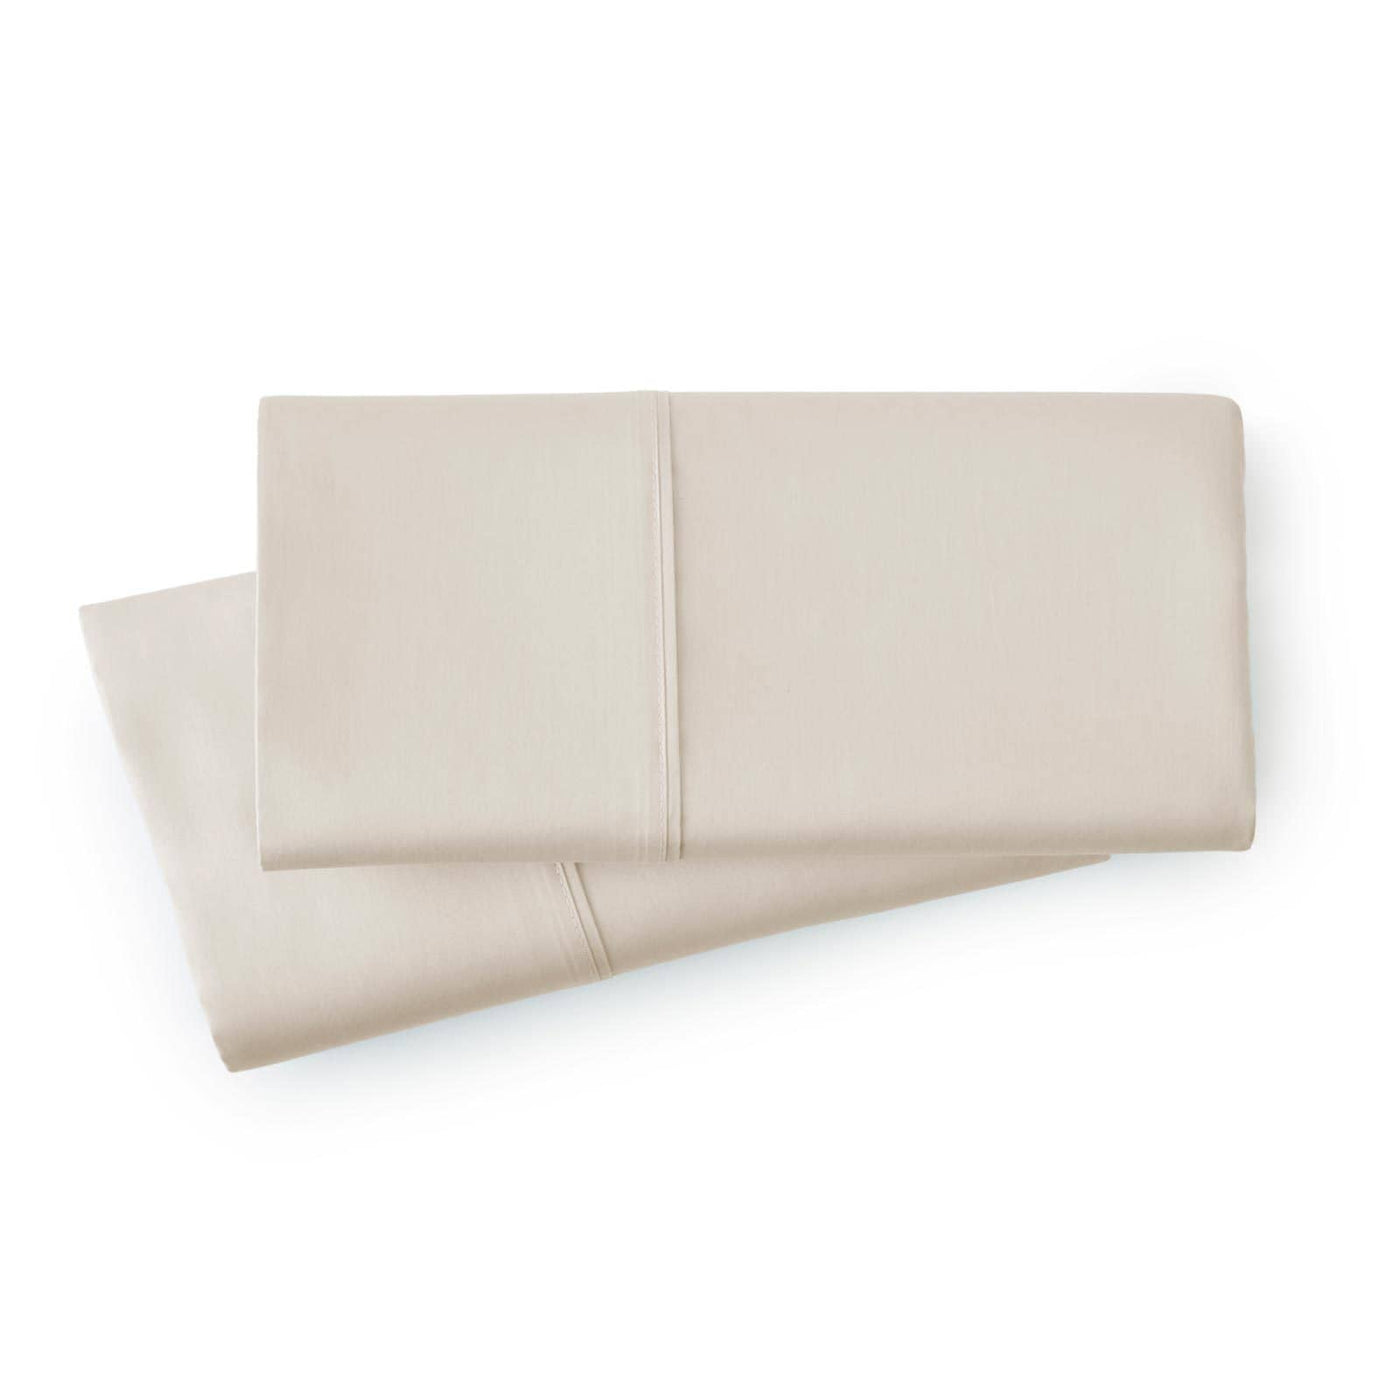 Sweetbrier 100% Cotton Sateen Pillow Cases in Sand#color_sweetbrier-soft-sand